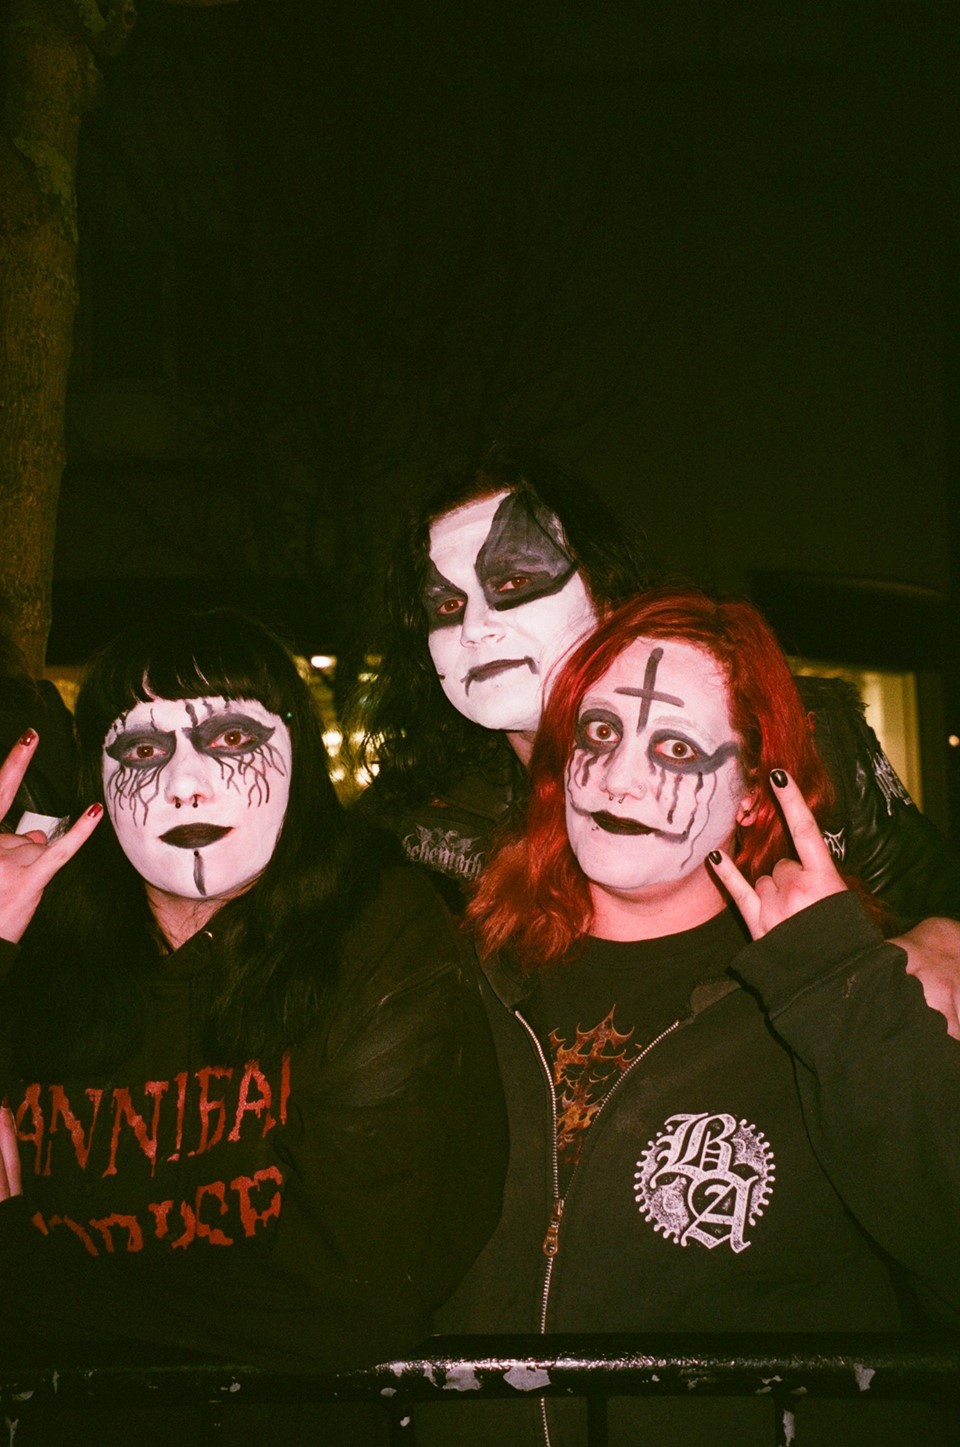 Capturing black metal fans in full 'corpse paint